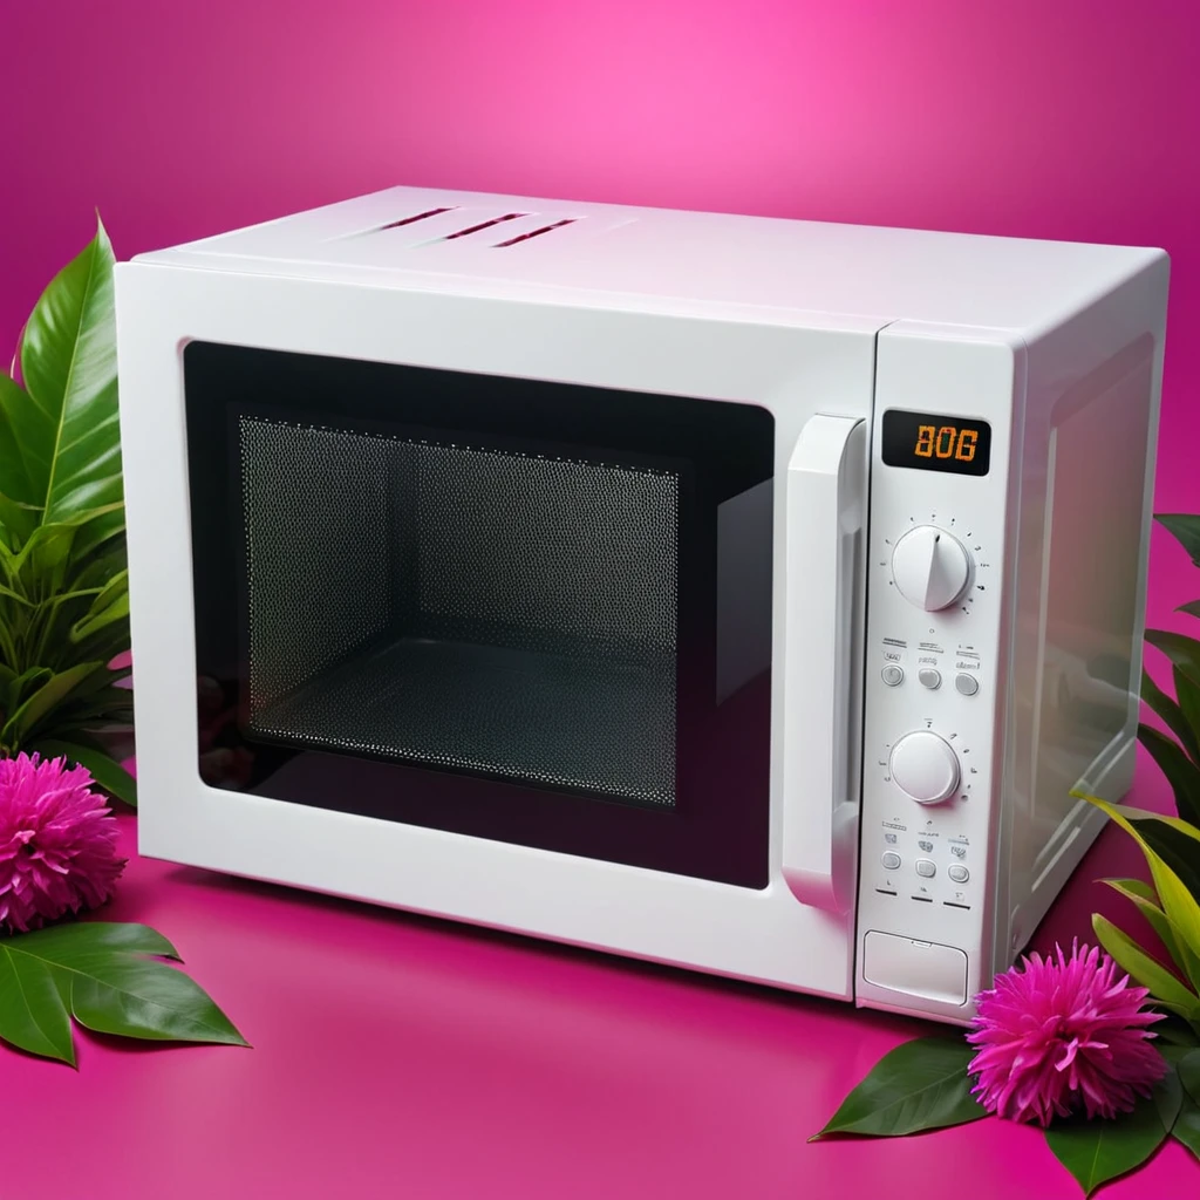 (microwave showcase) <lora:50_microwave_showcase:1.1>
Magenta background,
high quality, professional, highres, amazing, dr...